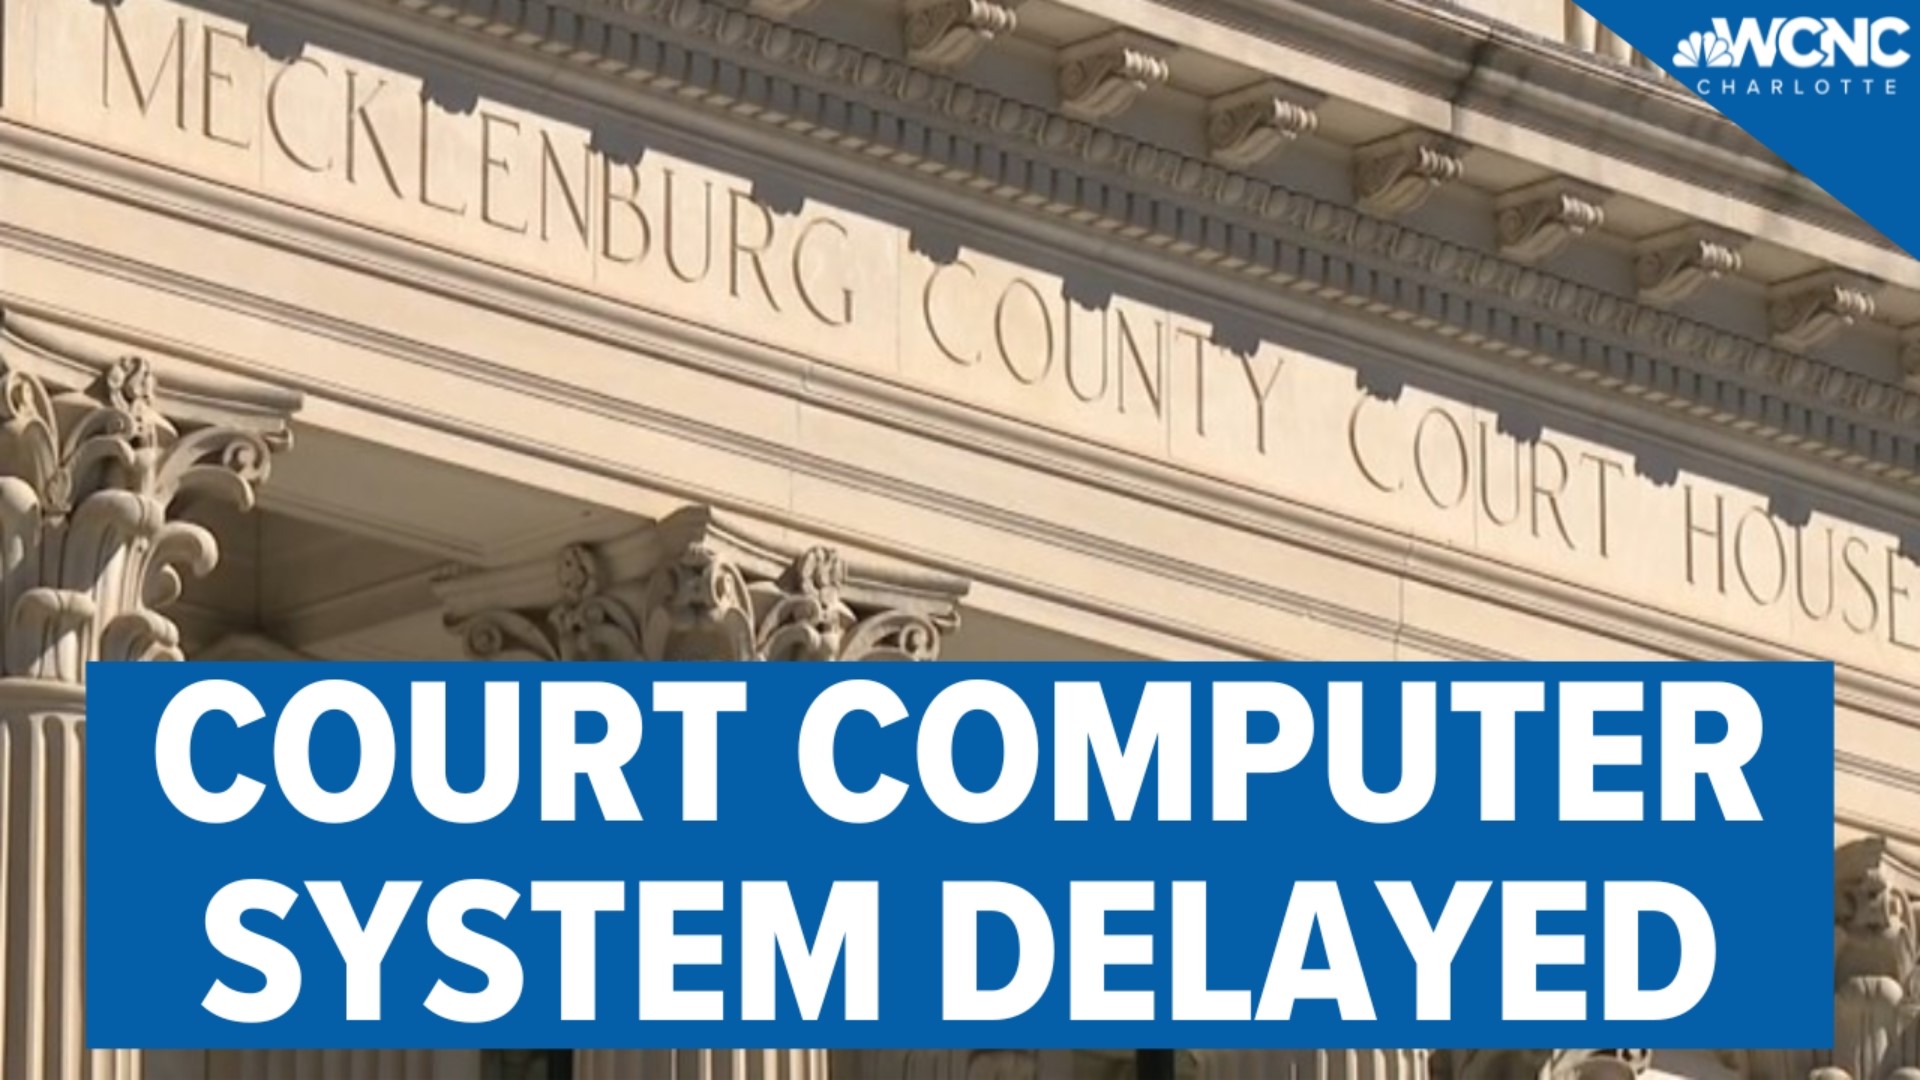 Wake County and several other North Carolina counties have been experiencing issues with the new system.